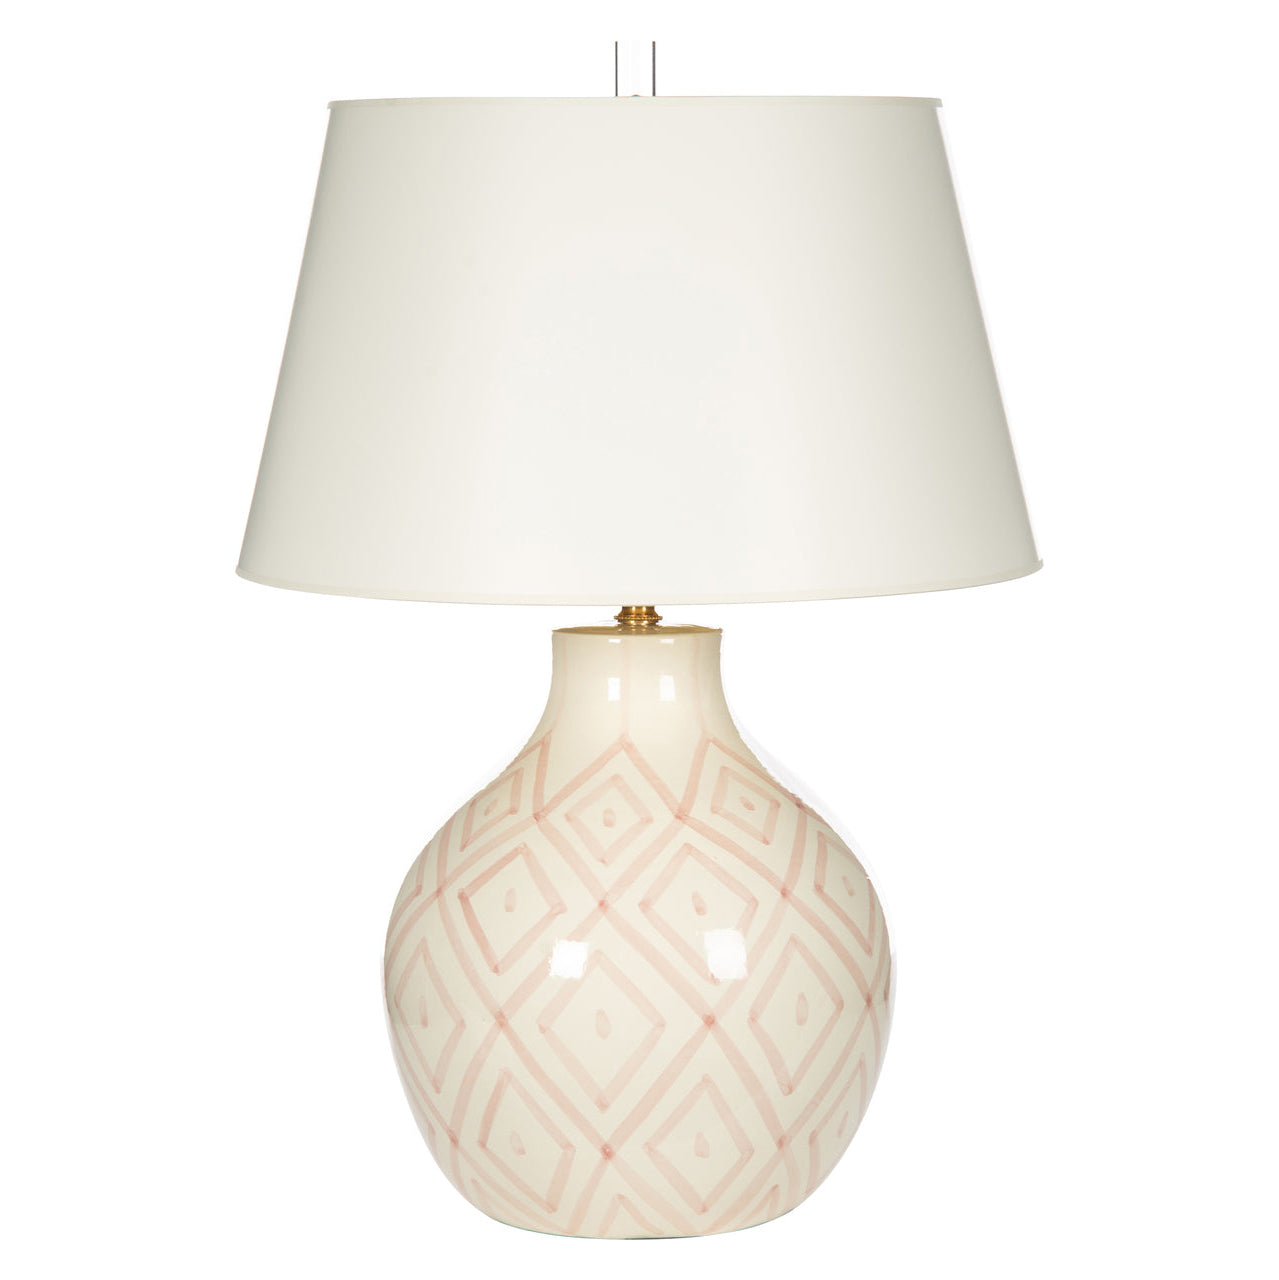 Prism Pink hand-painted geometric lamp, Melea Markell